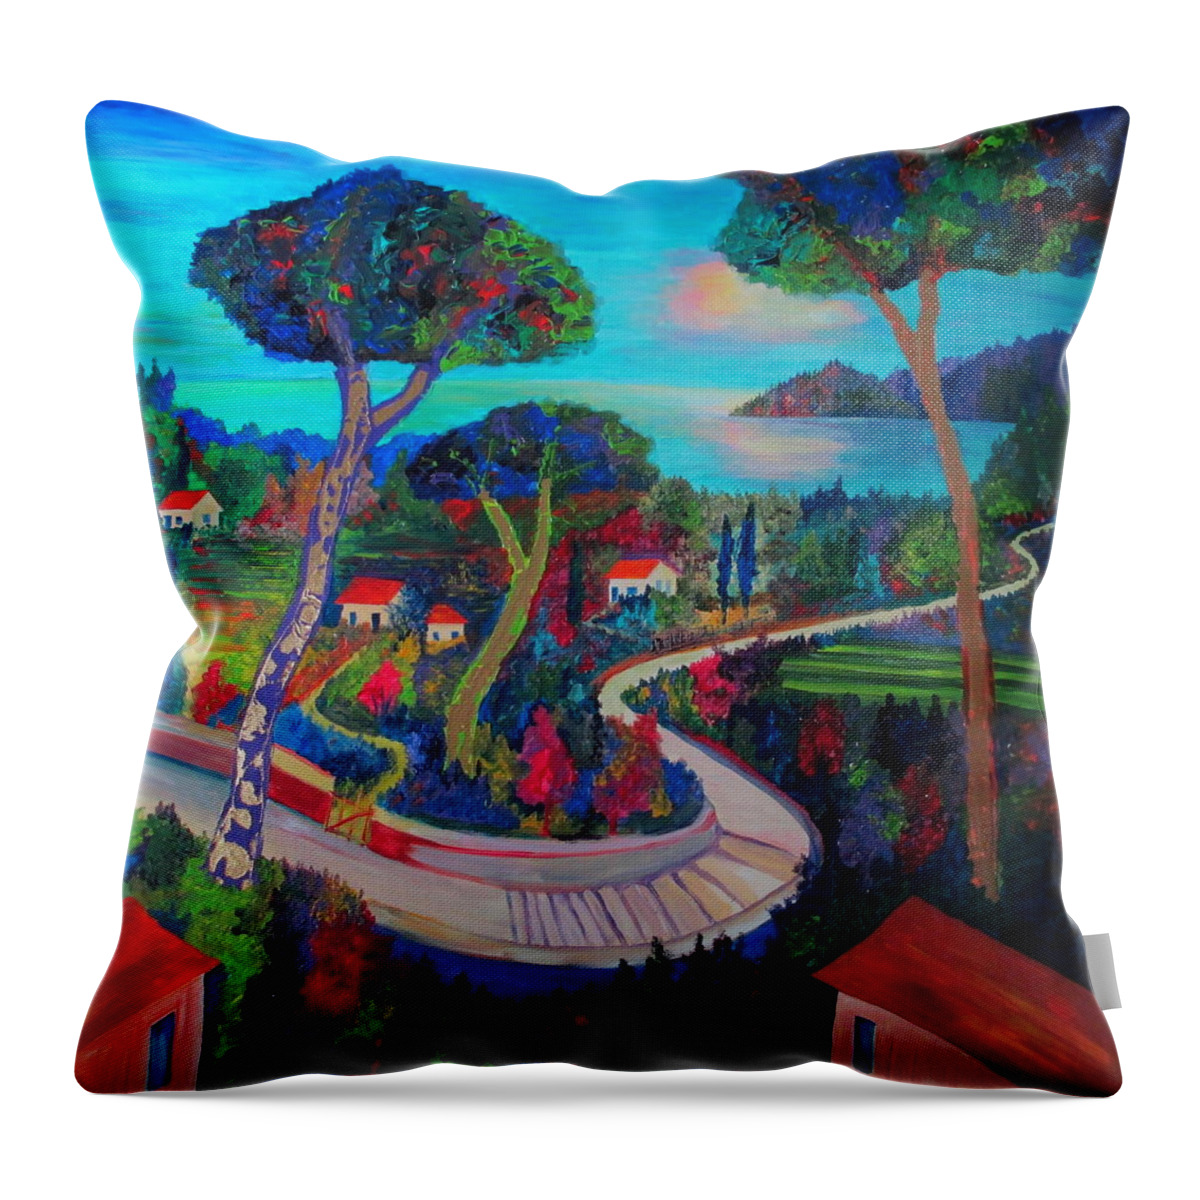 Landscape Throw Pillow featuring the painting The Road To Recovery by Randall Weidner